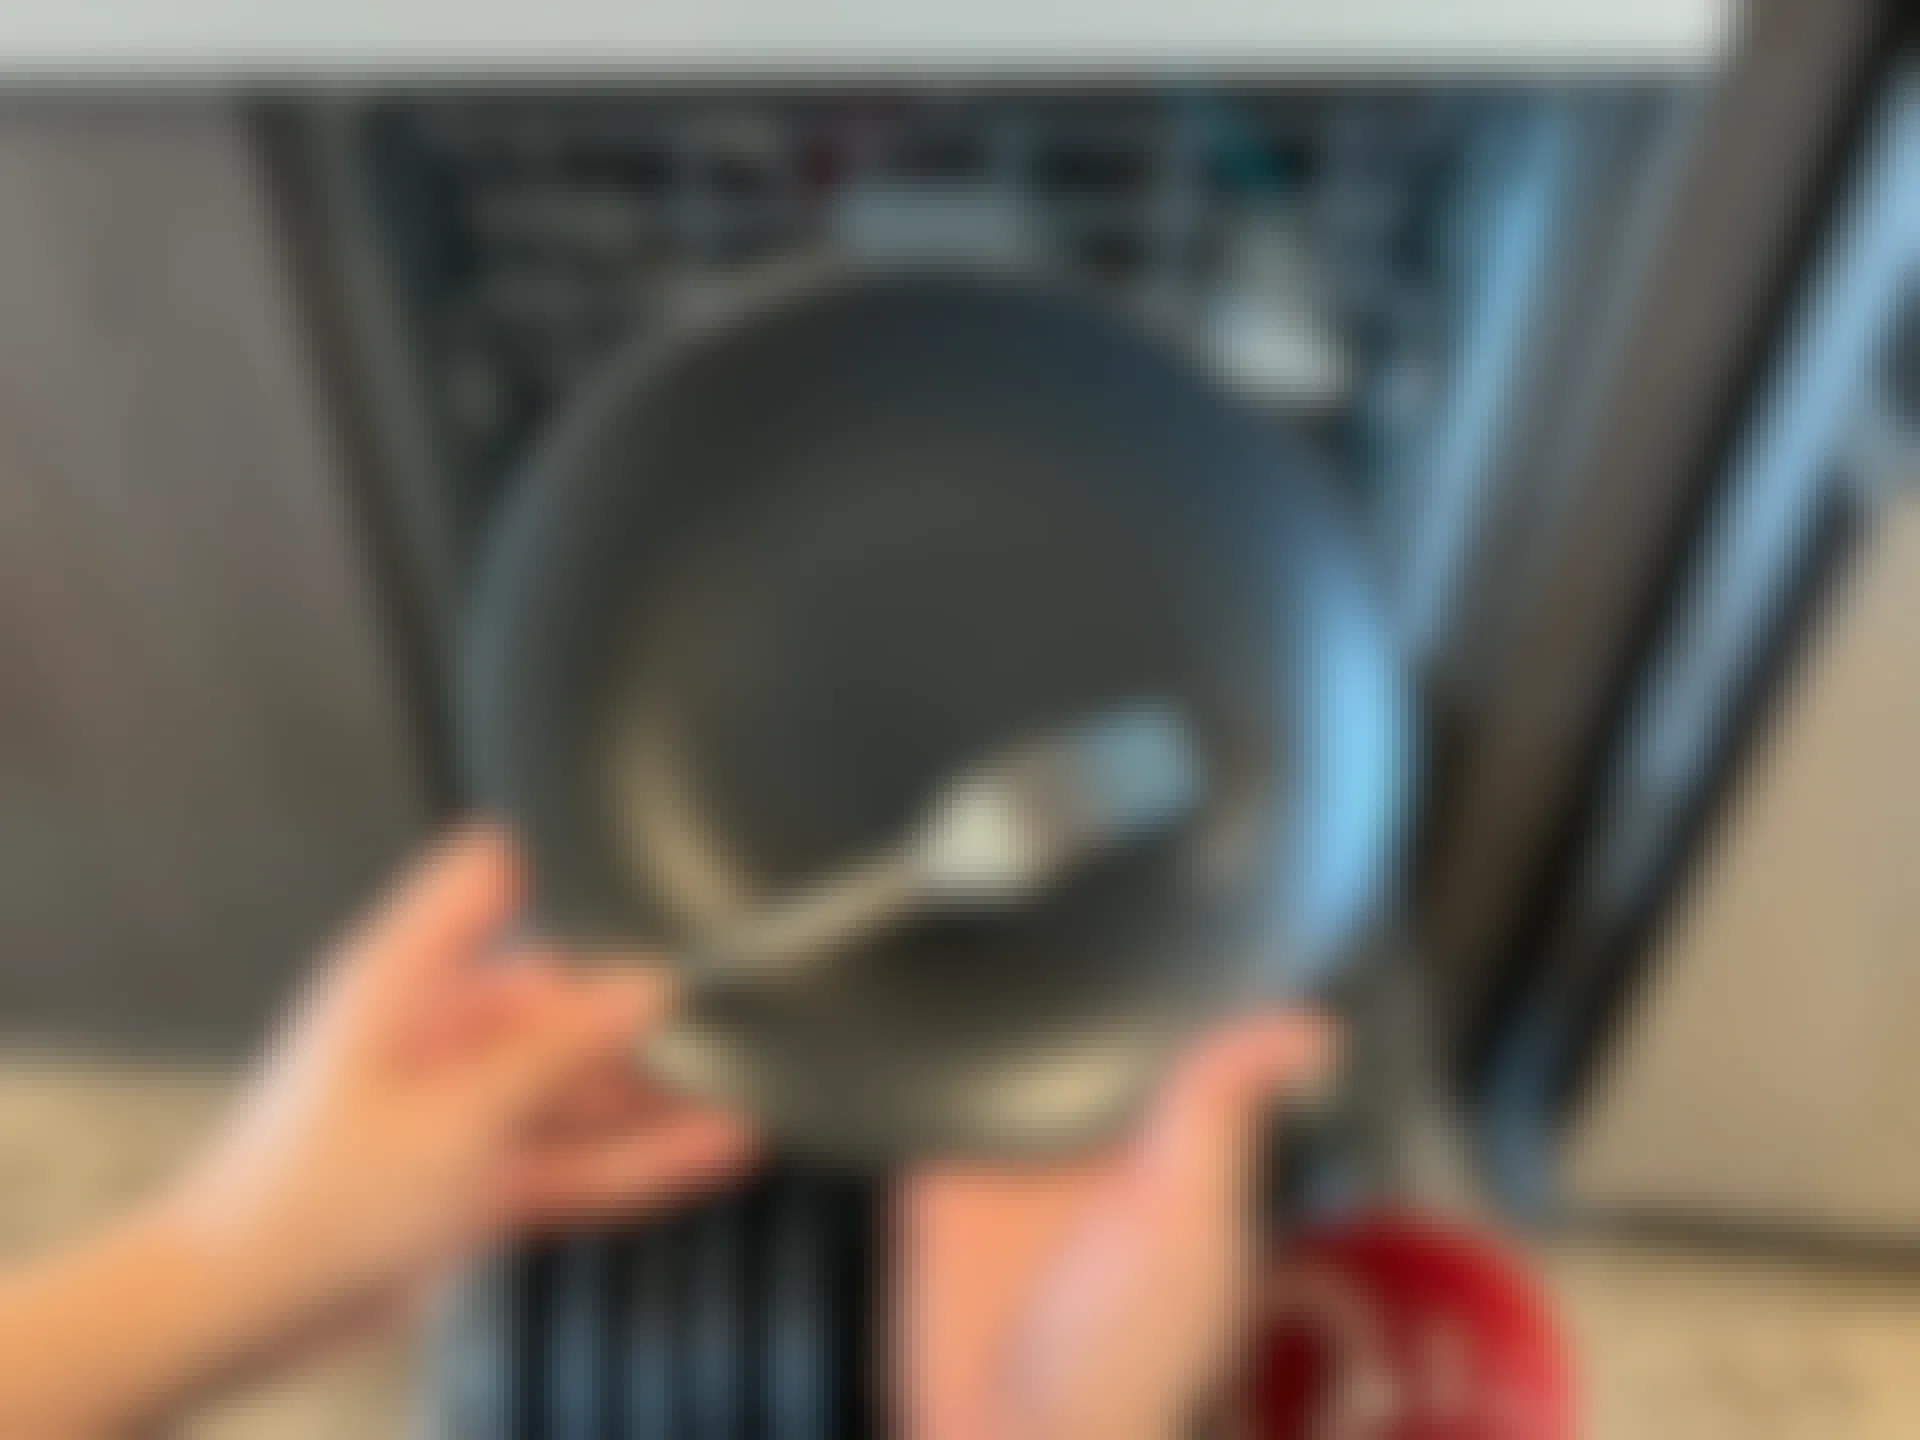 Hand holding a plate and fork in front of a dishwasher